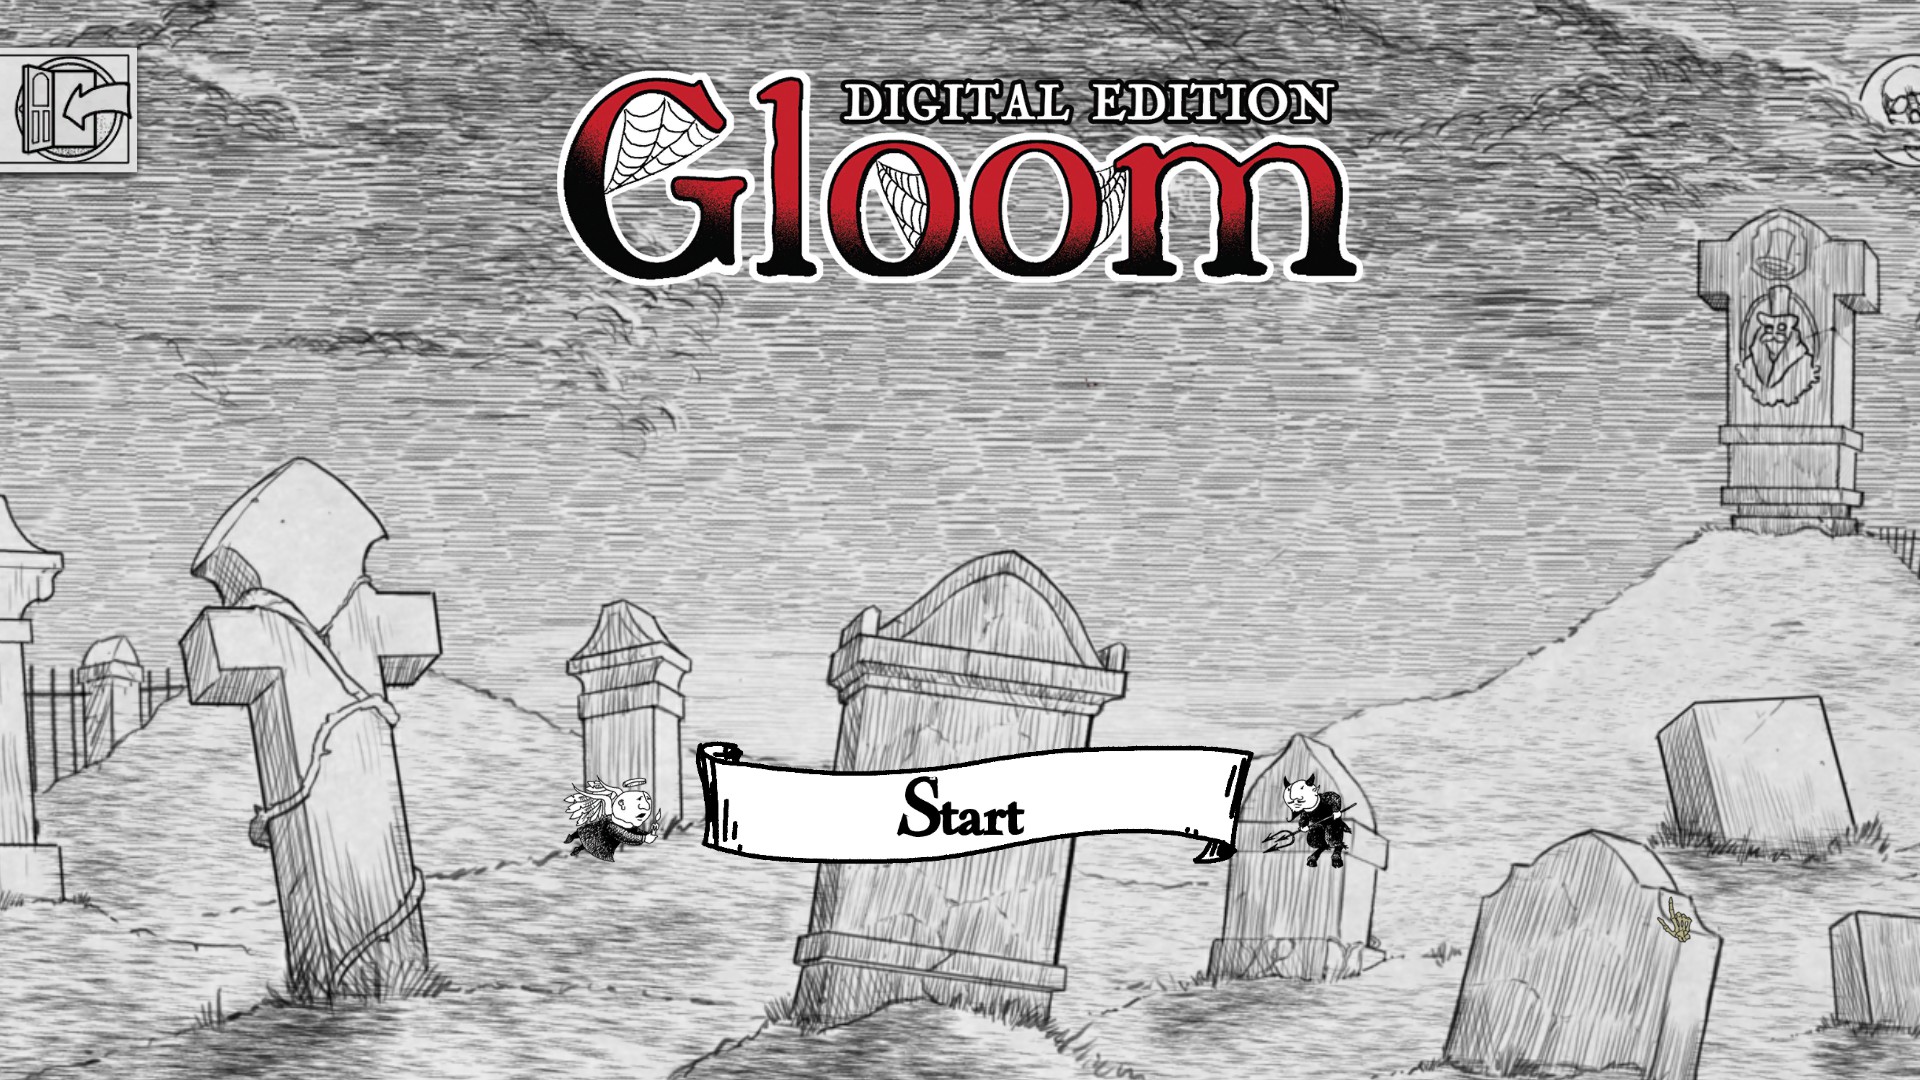 Gloom: Digital Edition Beginner’s Guide – Make Your Family Truly Miserable With These Hints, Tips and Tricks